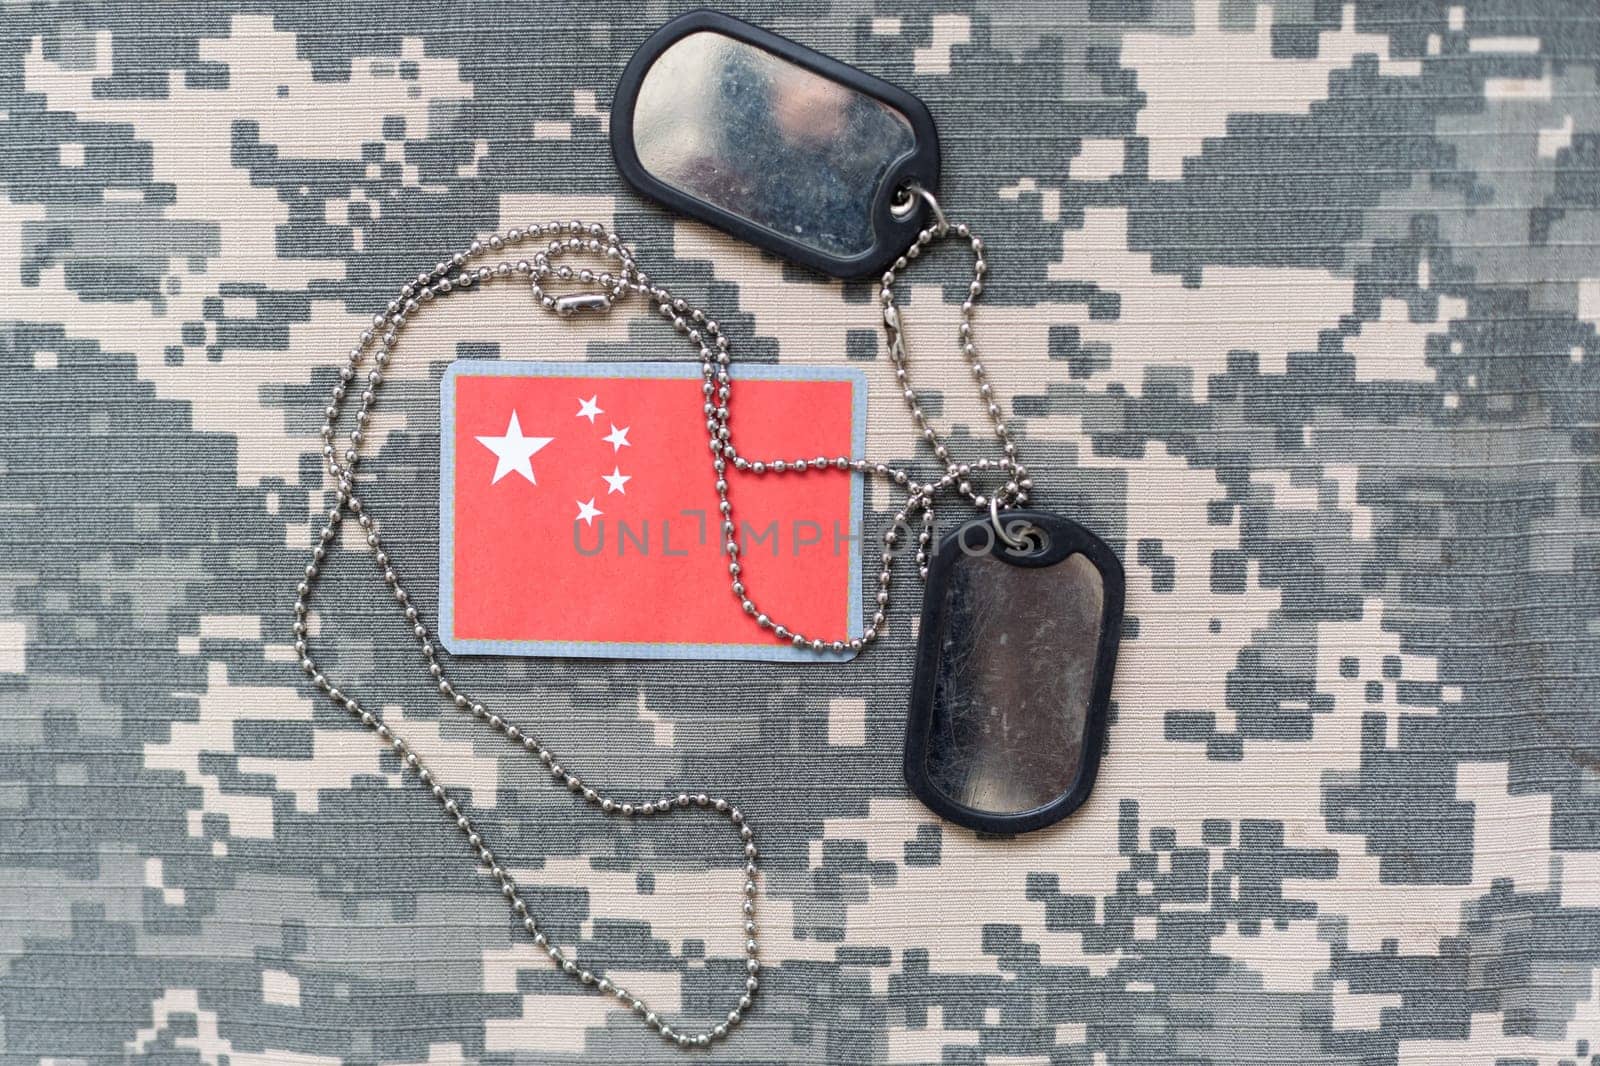 army blank, dog tag with flag china on the khaki texture background. military concept. High quality photo